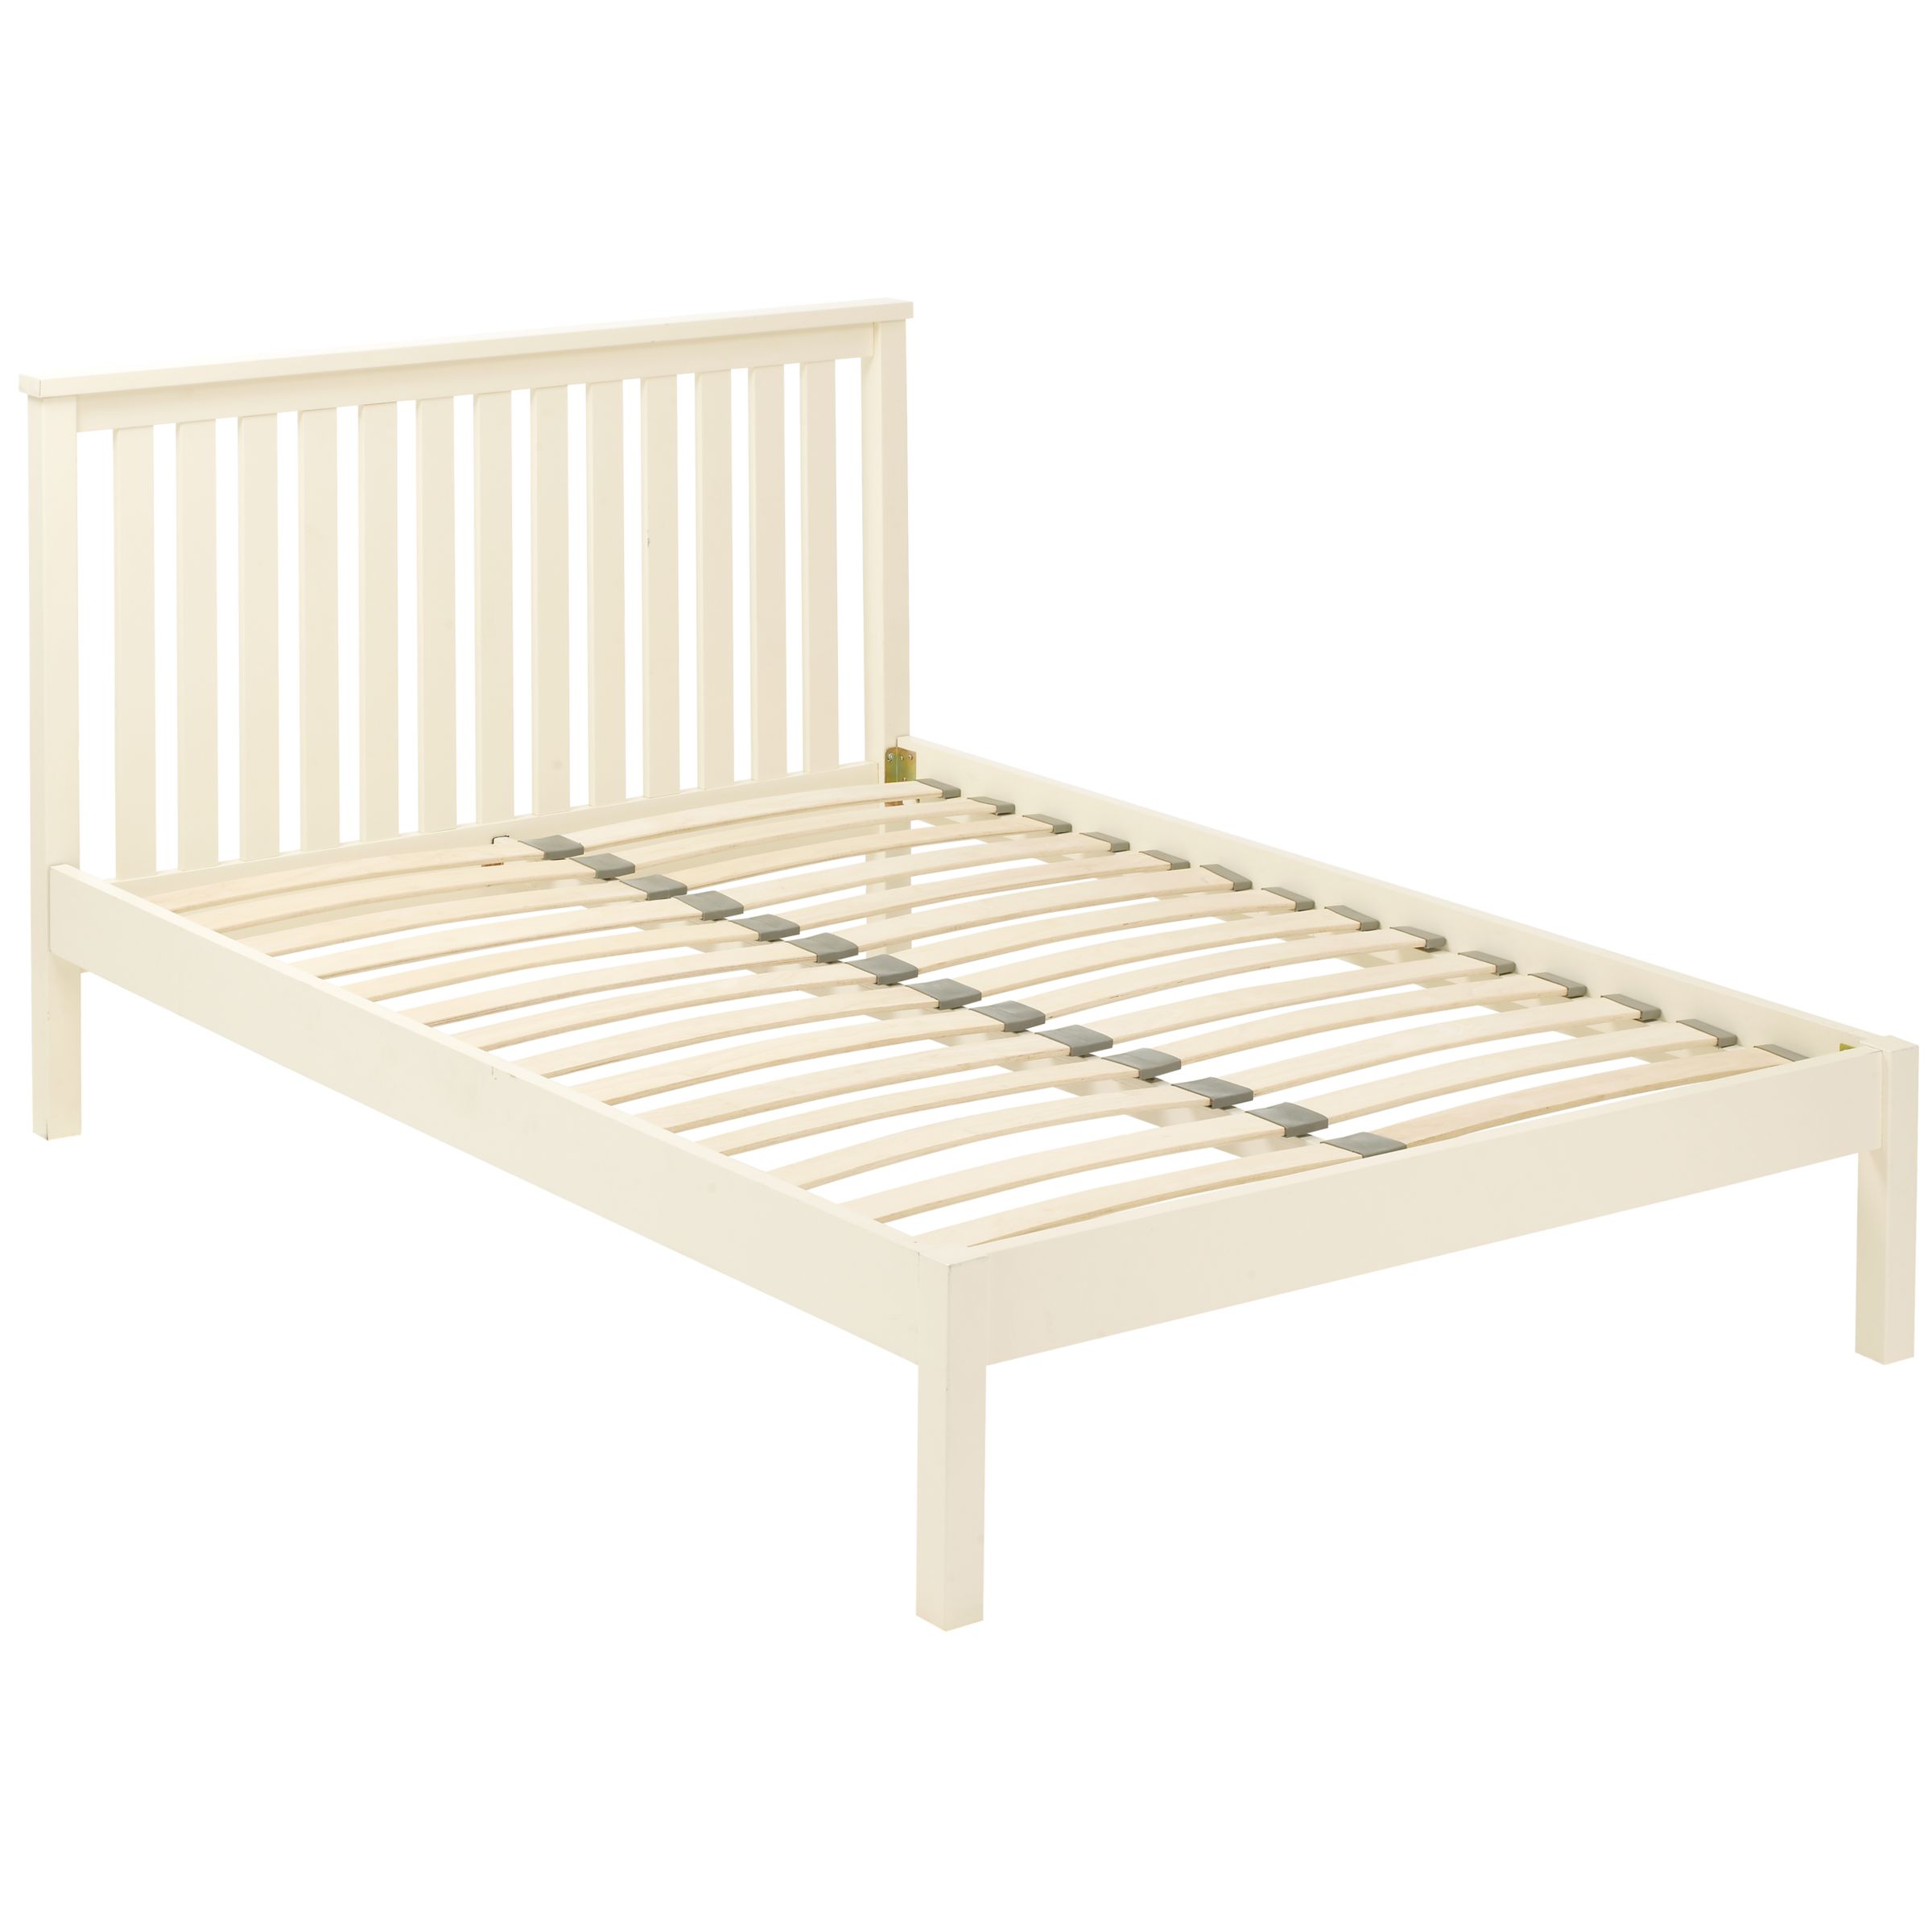 John Lewis Conway Low End Bedstead, Double at JohnLewis